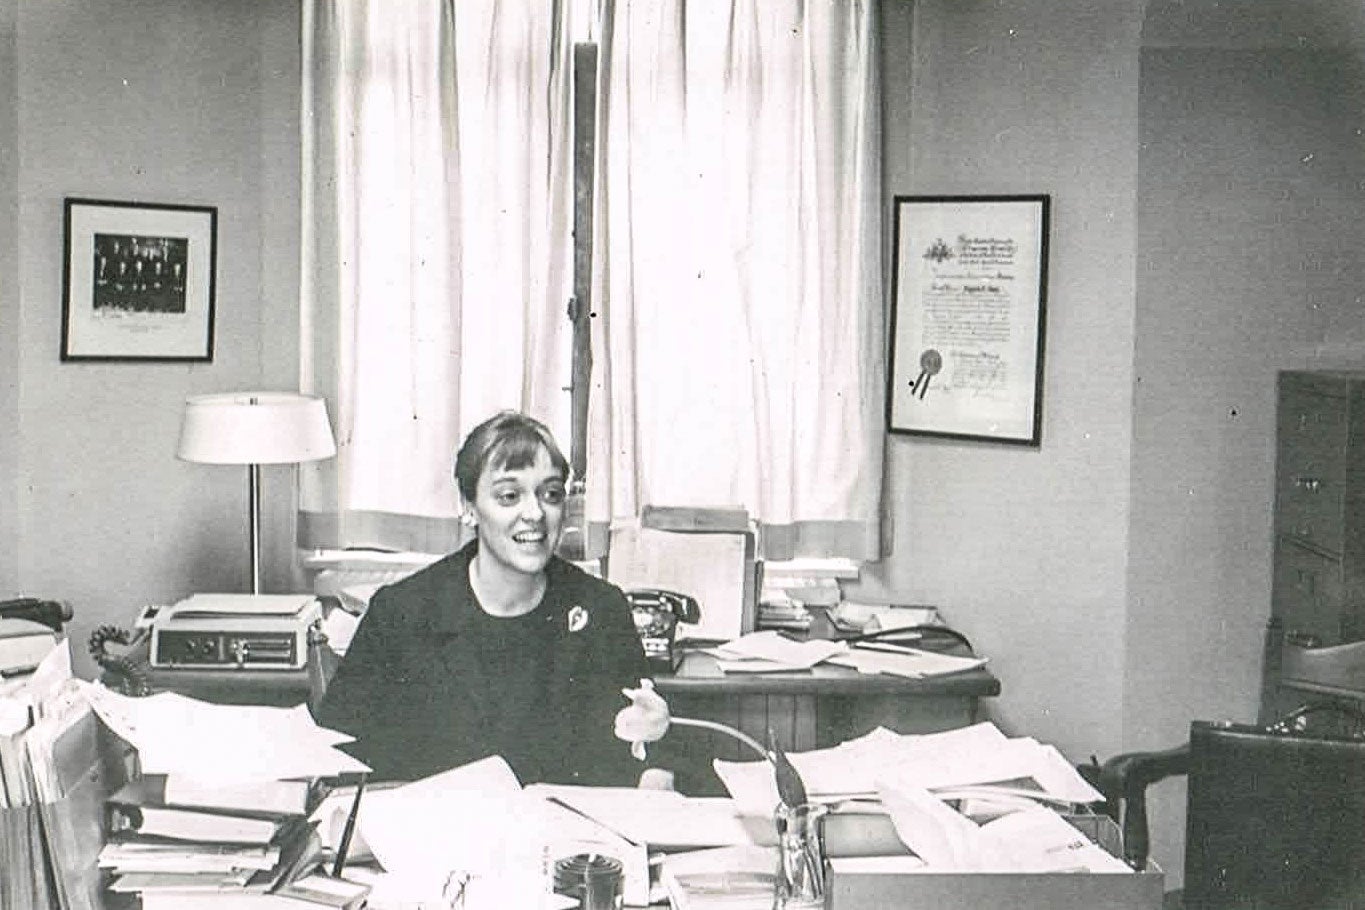 Virginia Davis Nordin sits at a desk piled high with papers.